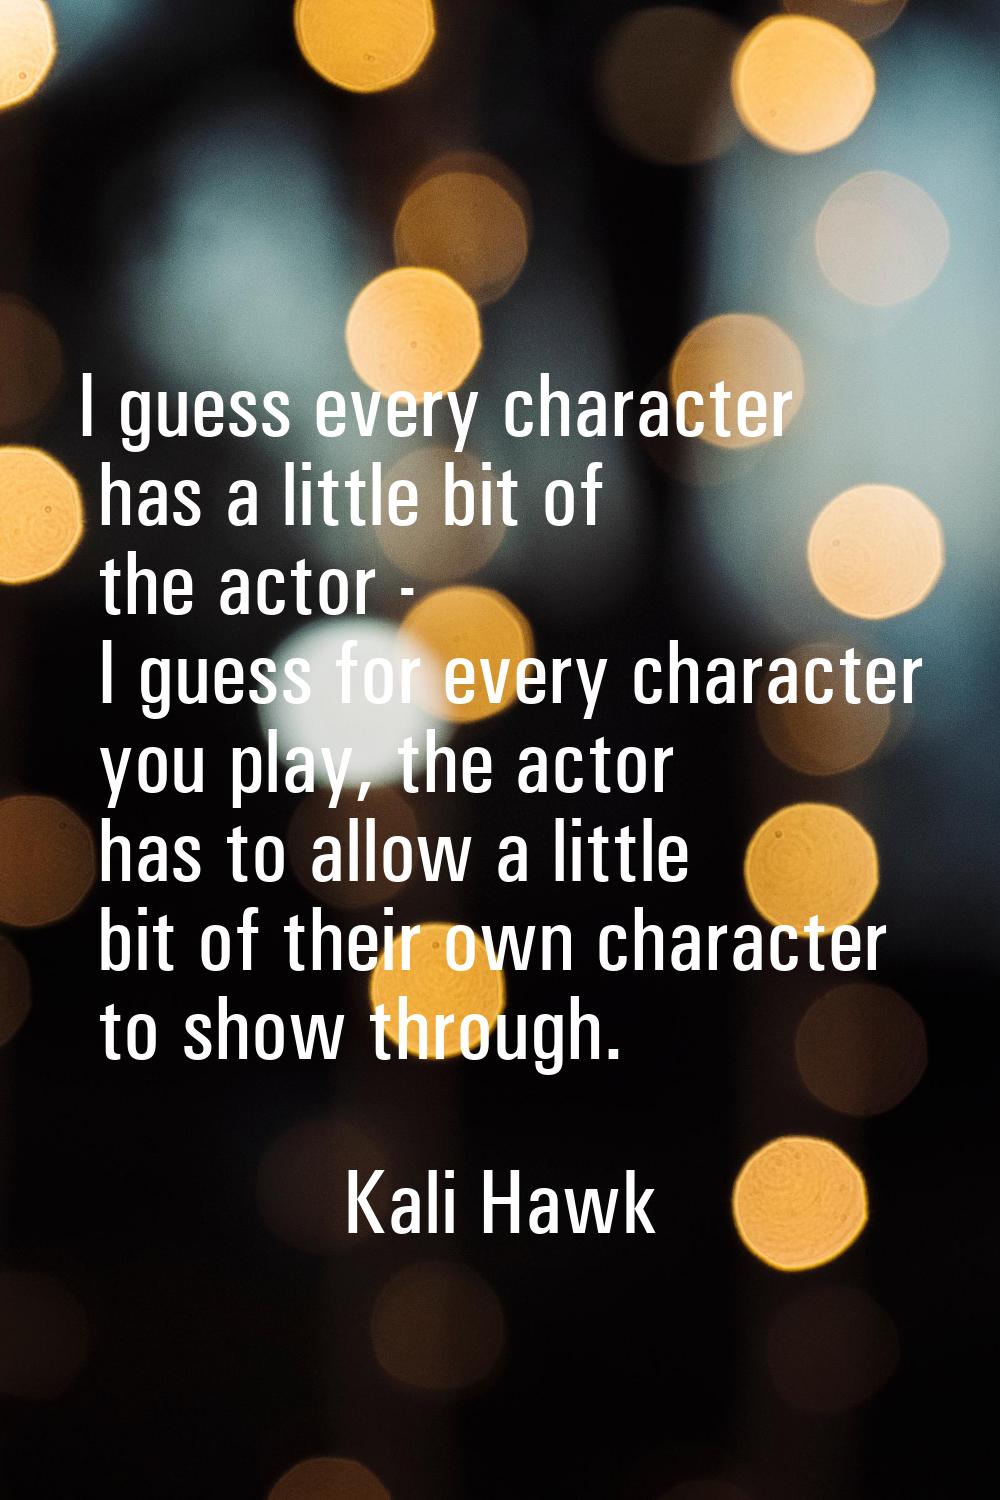 I guess every character has a little bit of the actor - I guess for every character you play, the a